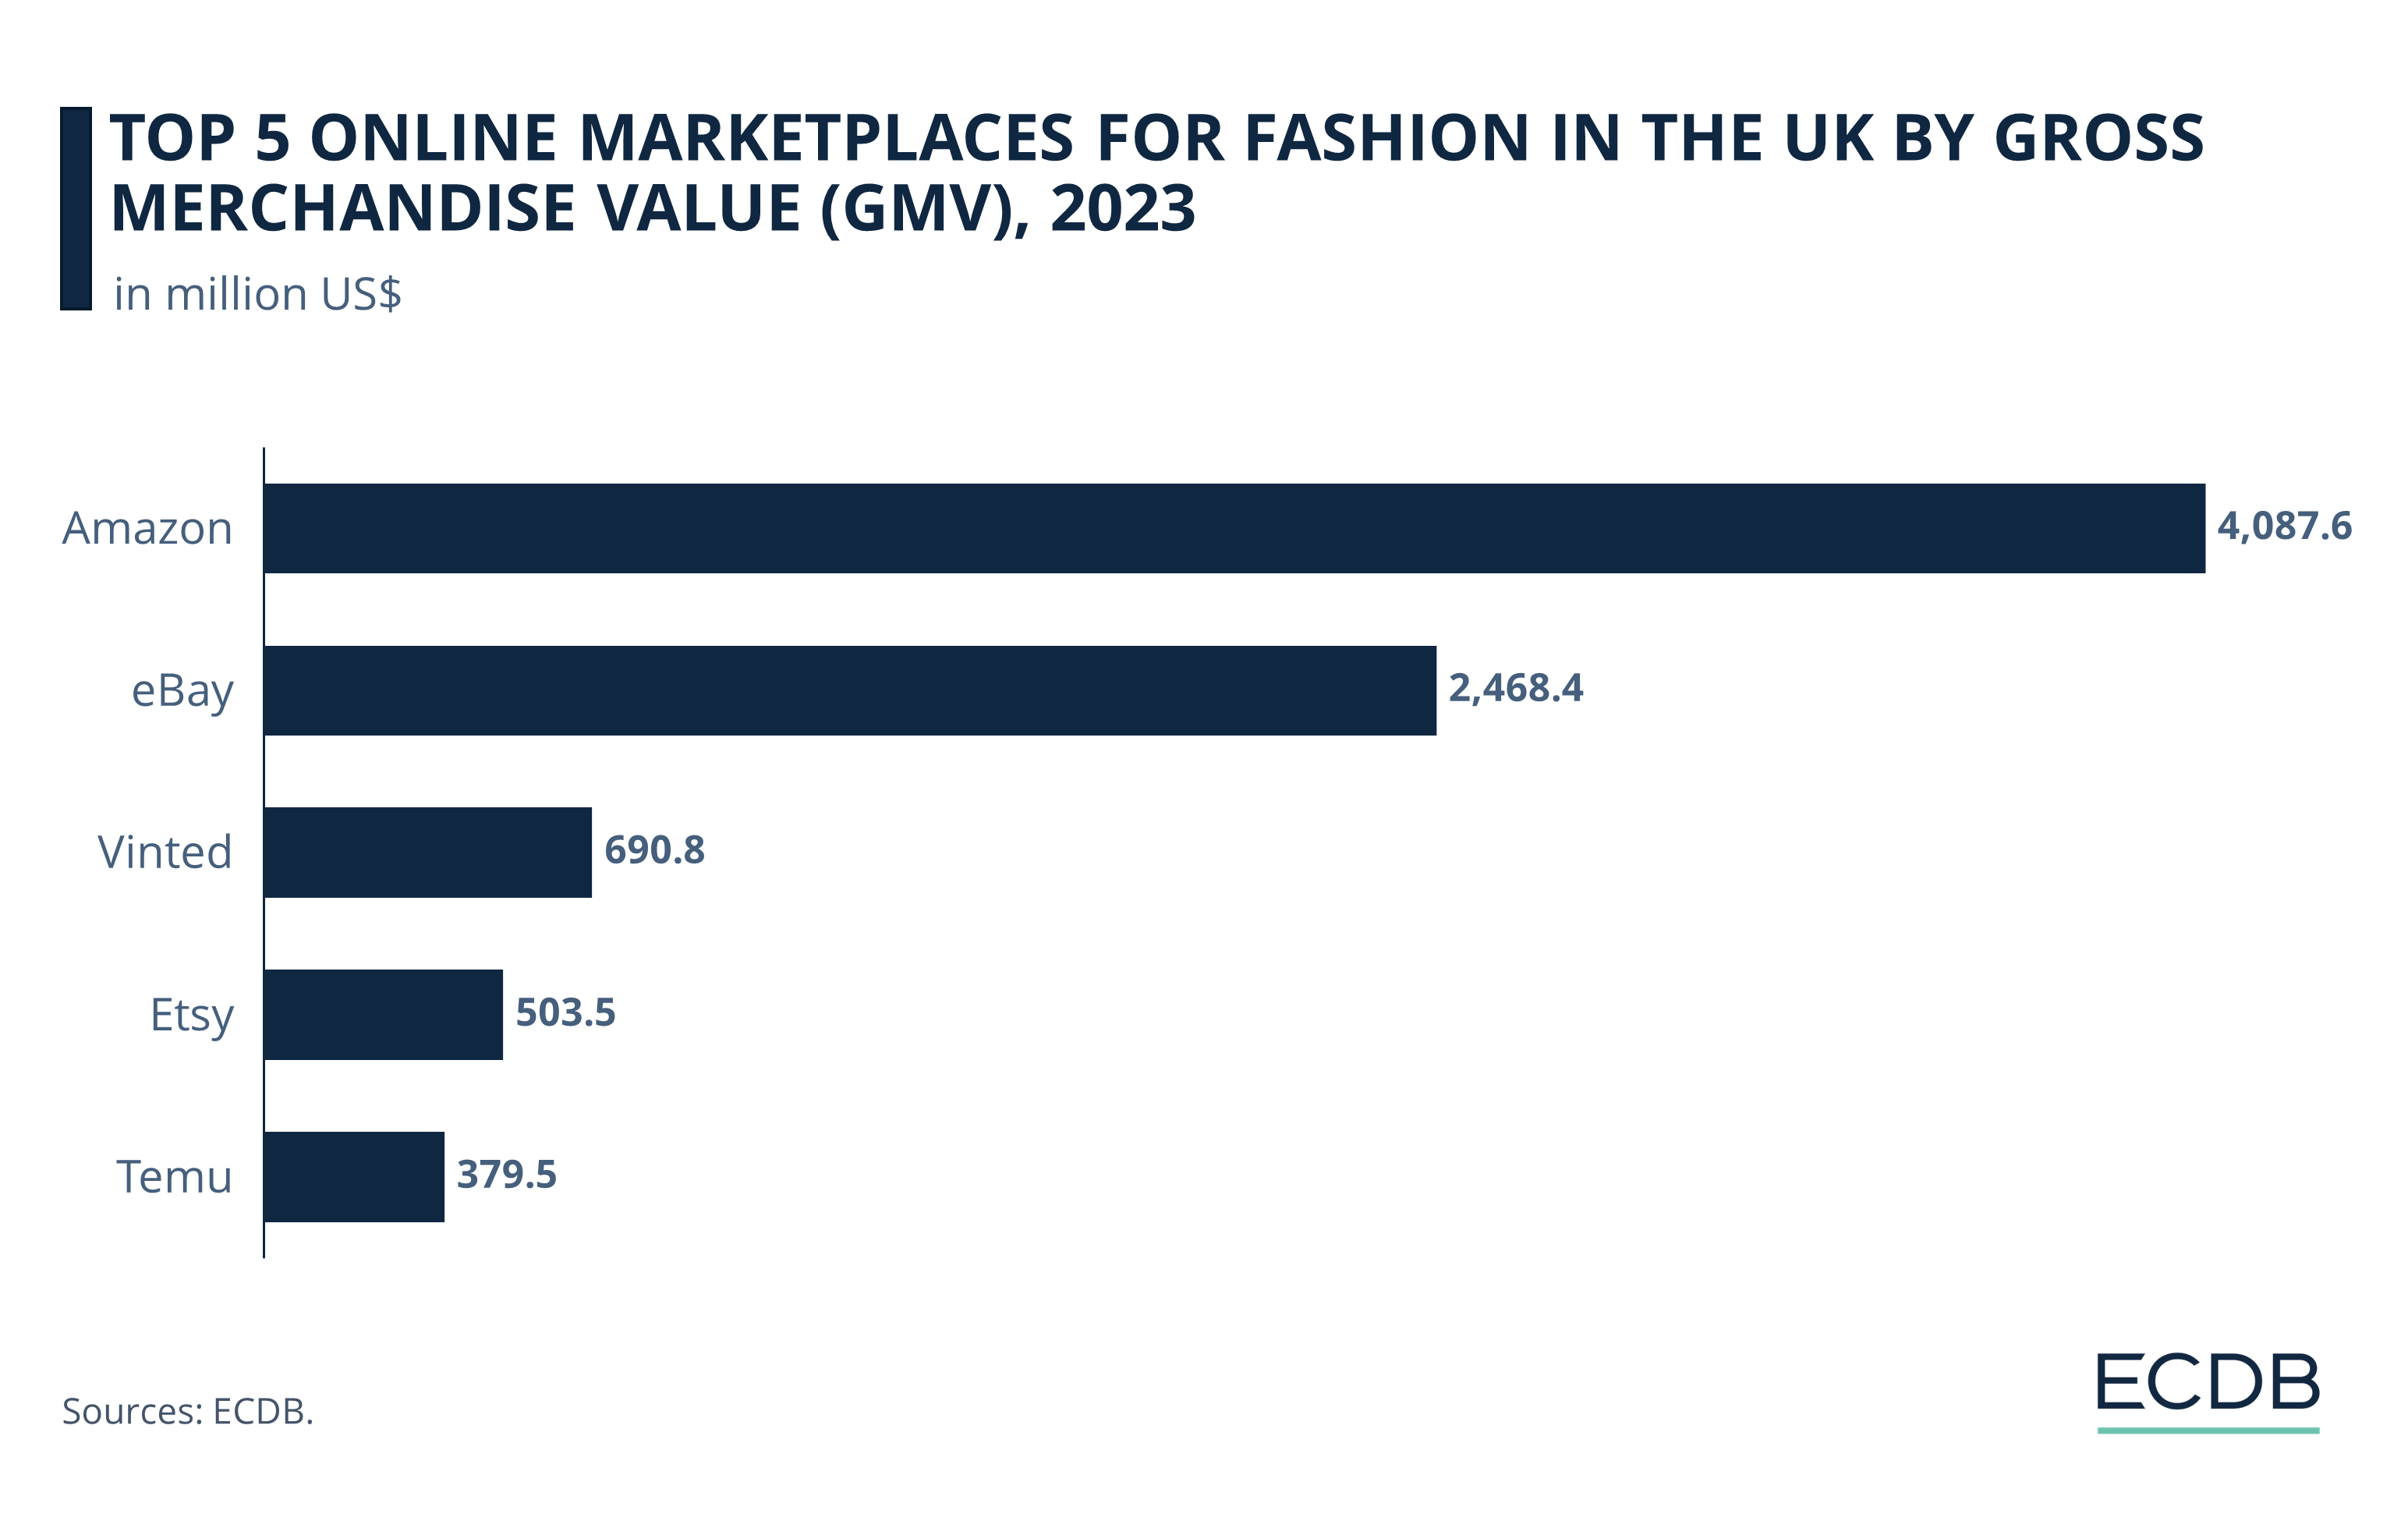 Top 5 Online Marketplaces for Fashion in the UK by Gross Merchandise Value (GMV), 2022